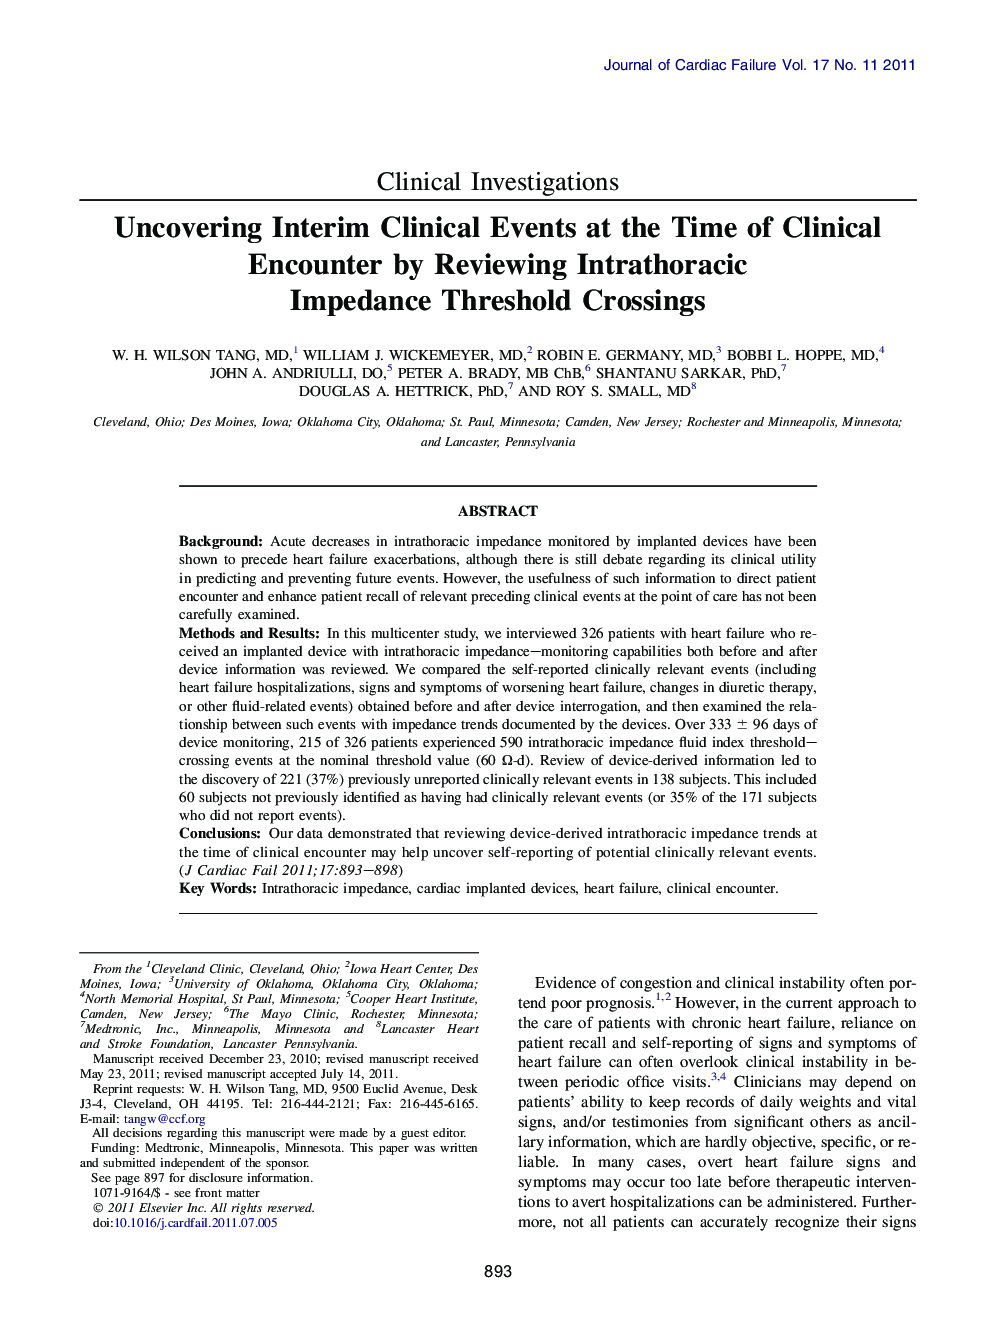 Uncovering Interim Clinical Events at the Time of Clinical Encounter by Reviewing Intrathoracic Impedance Threshold Crossings